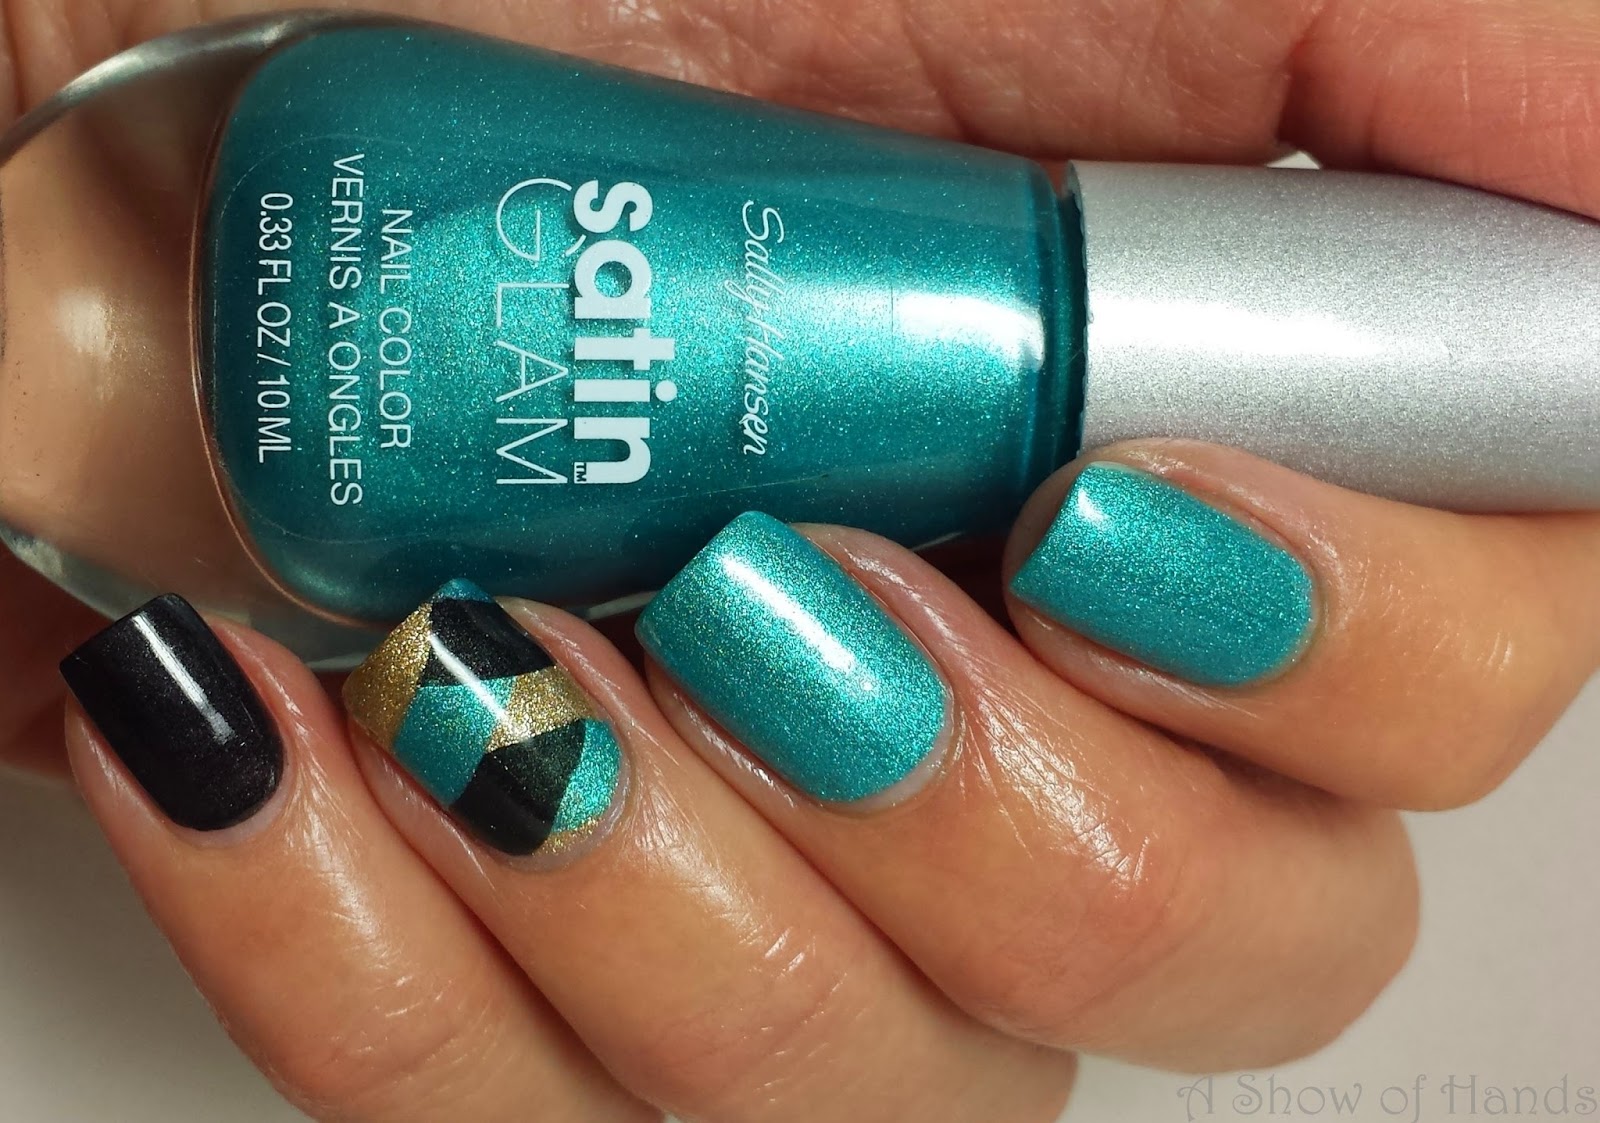 A Show of Hands: Monday Blues - Sally Hansen Satin Glam Teal Tulle